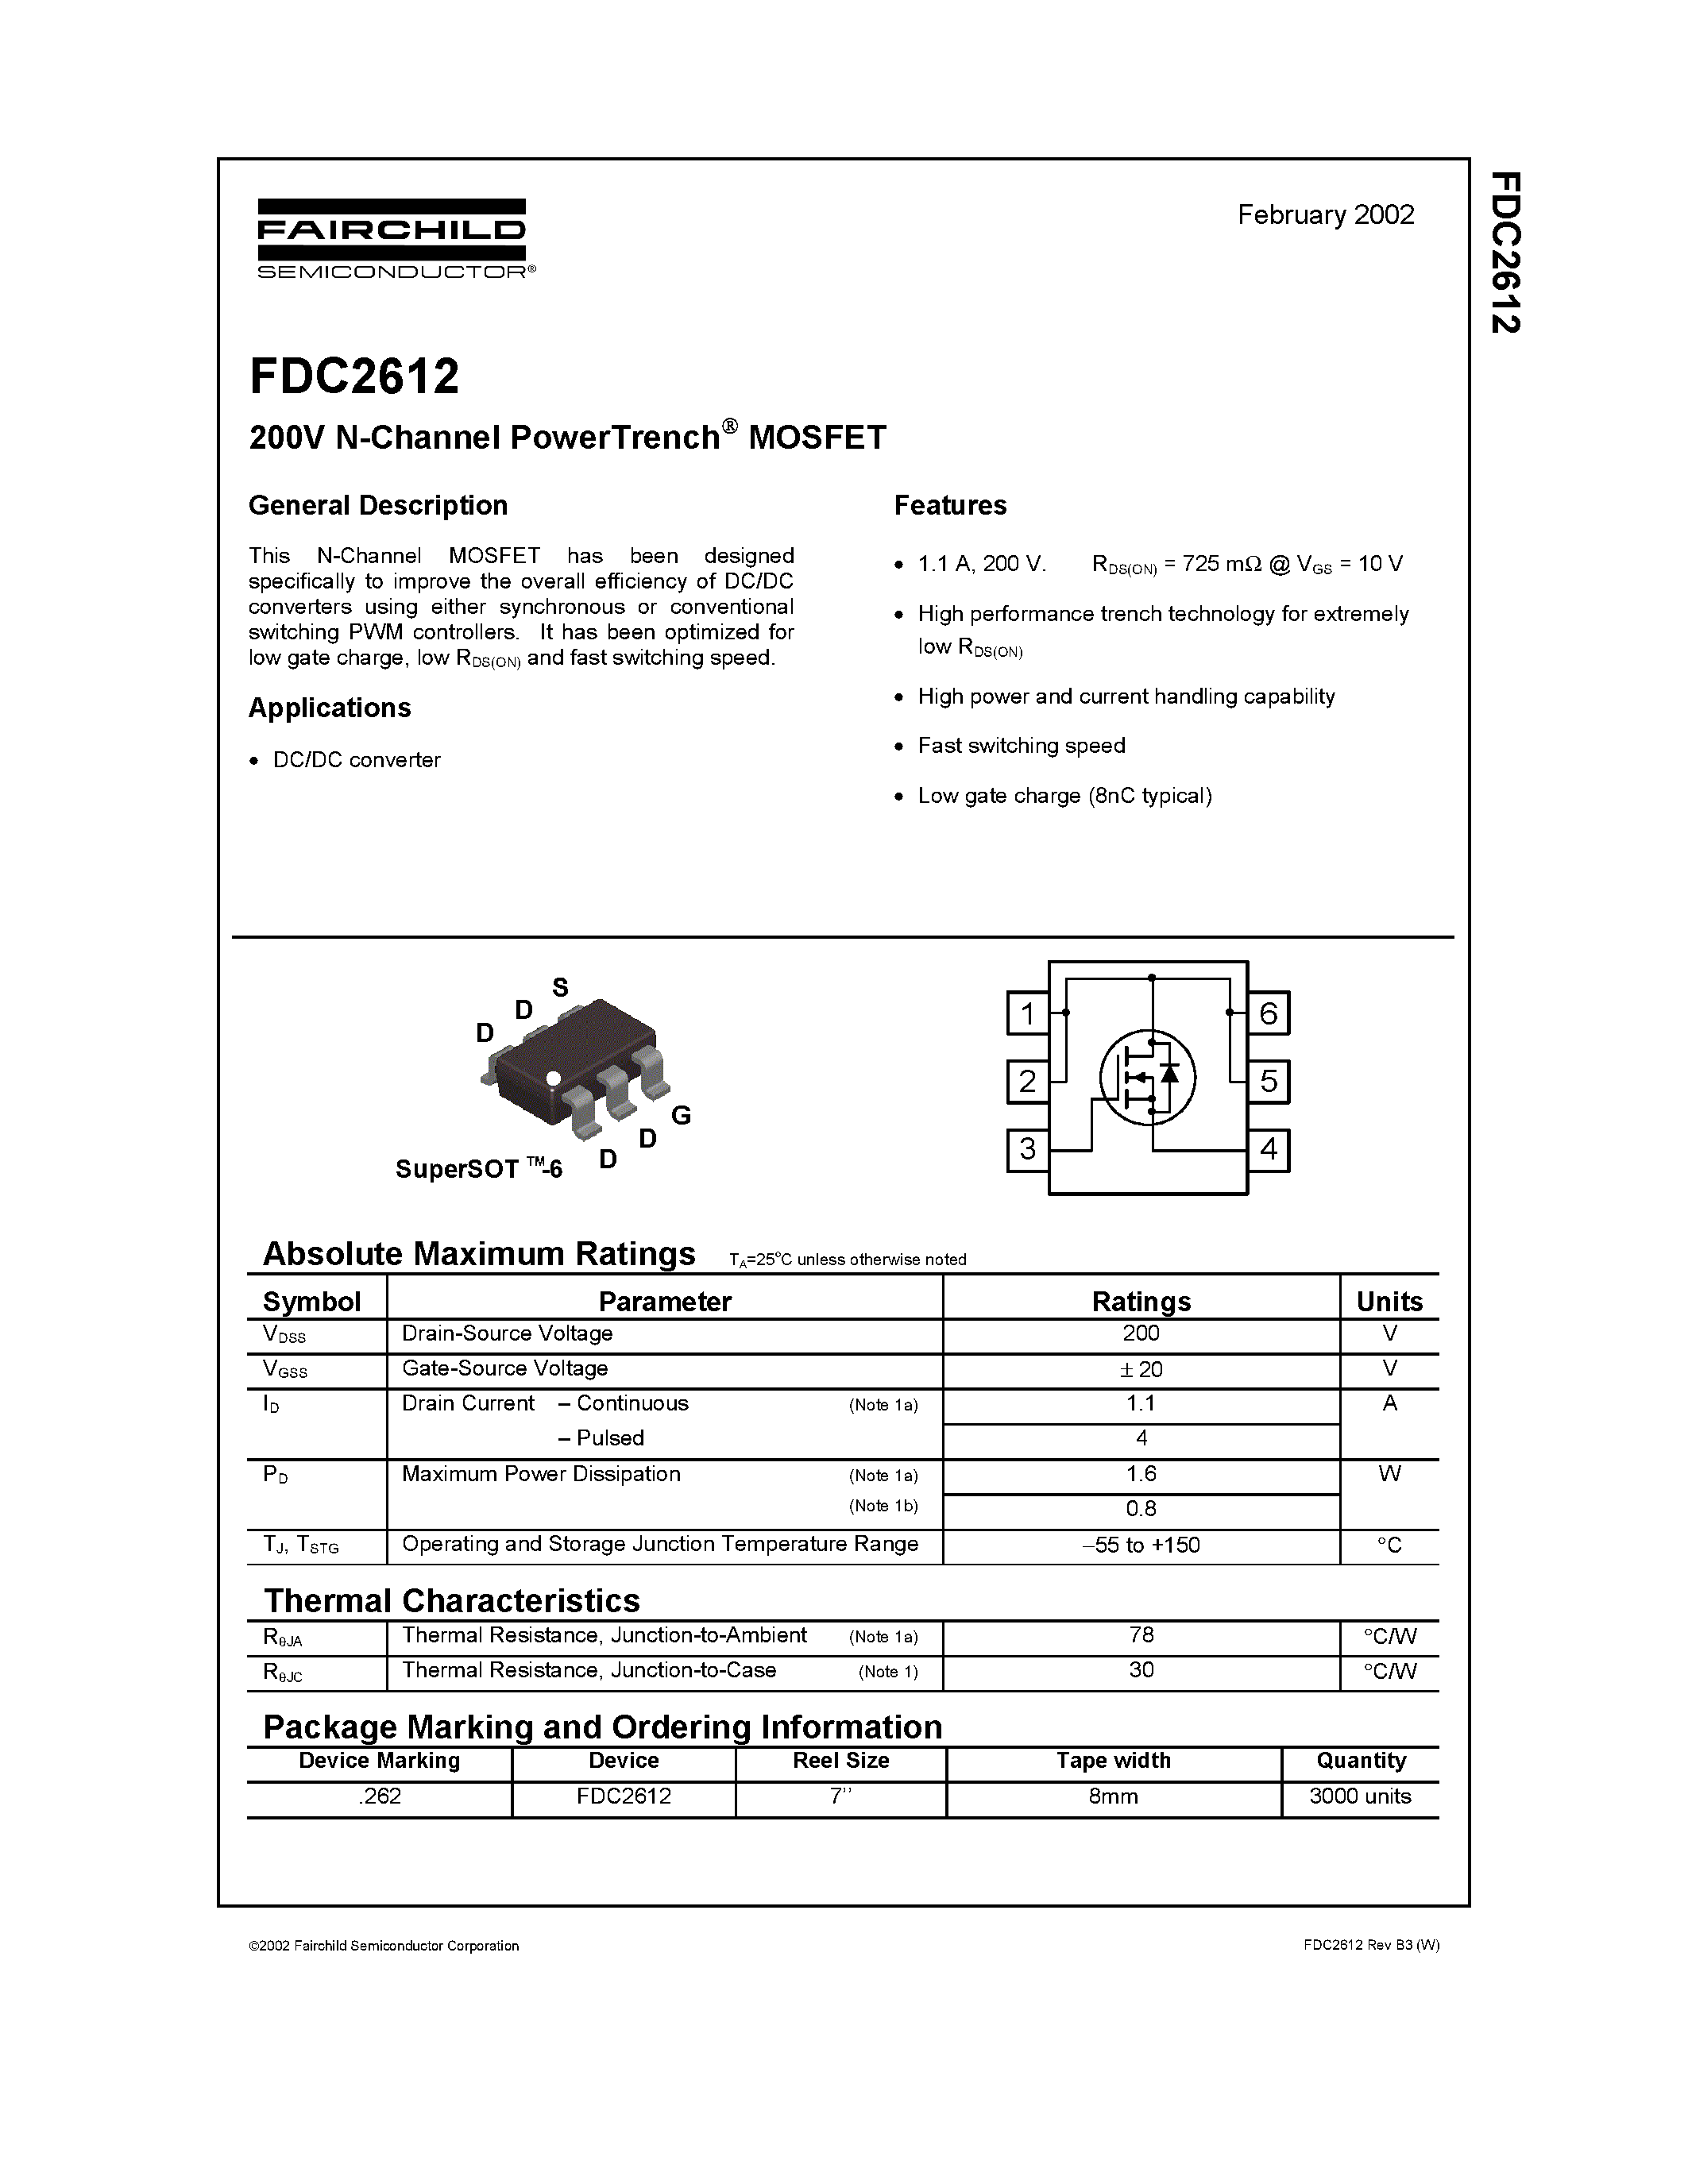 Datasheet FDC2612 - 200V N-Channel PowerTrench MOSFET page 1